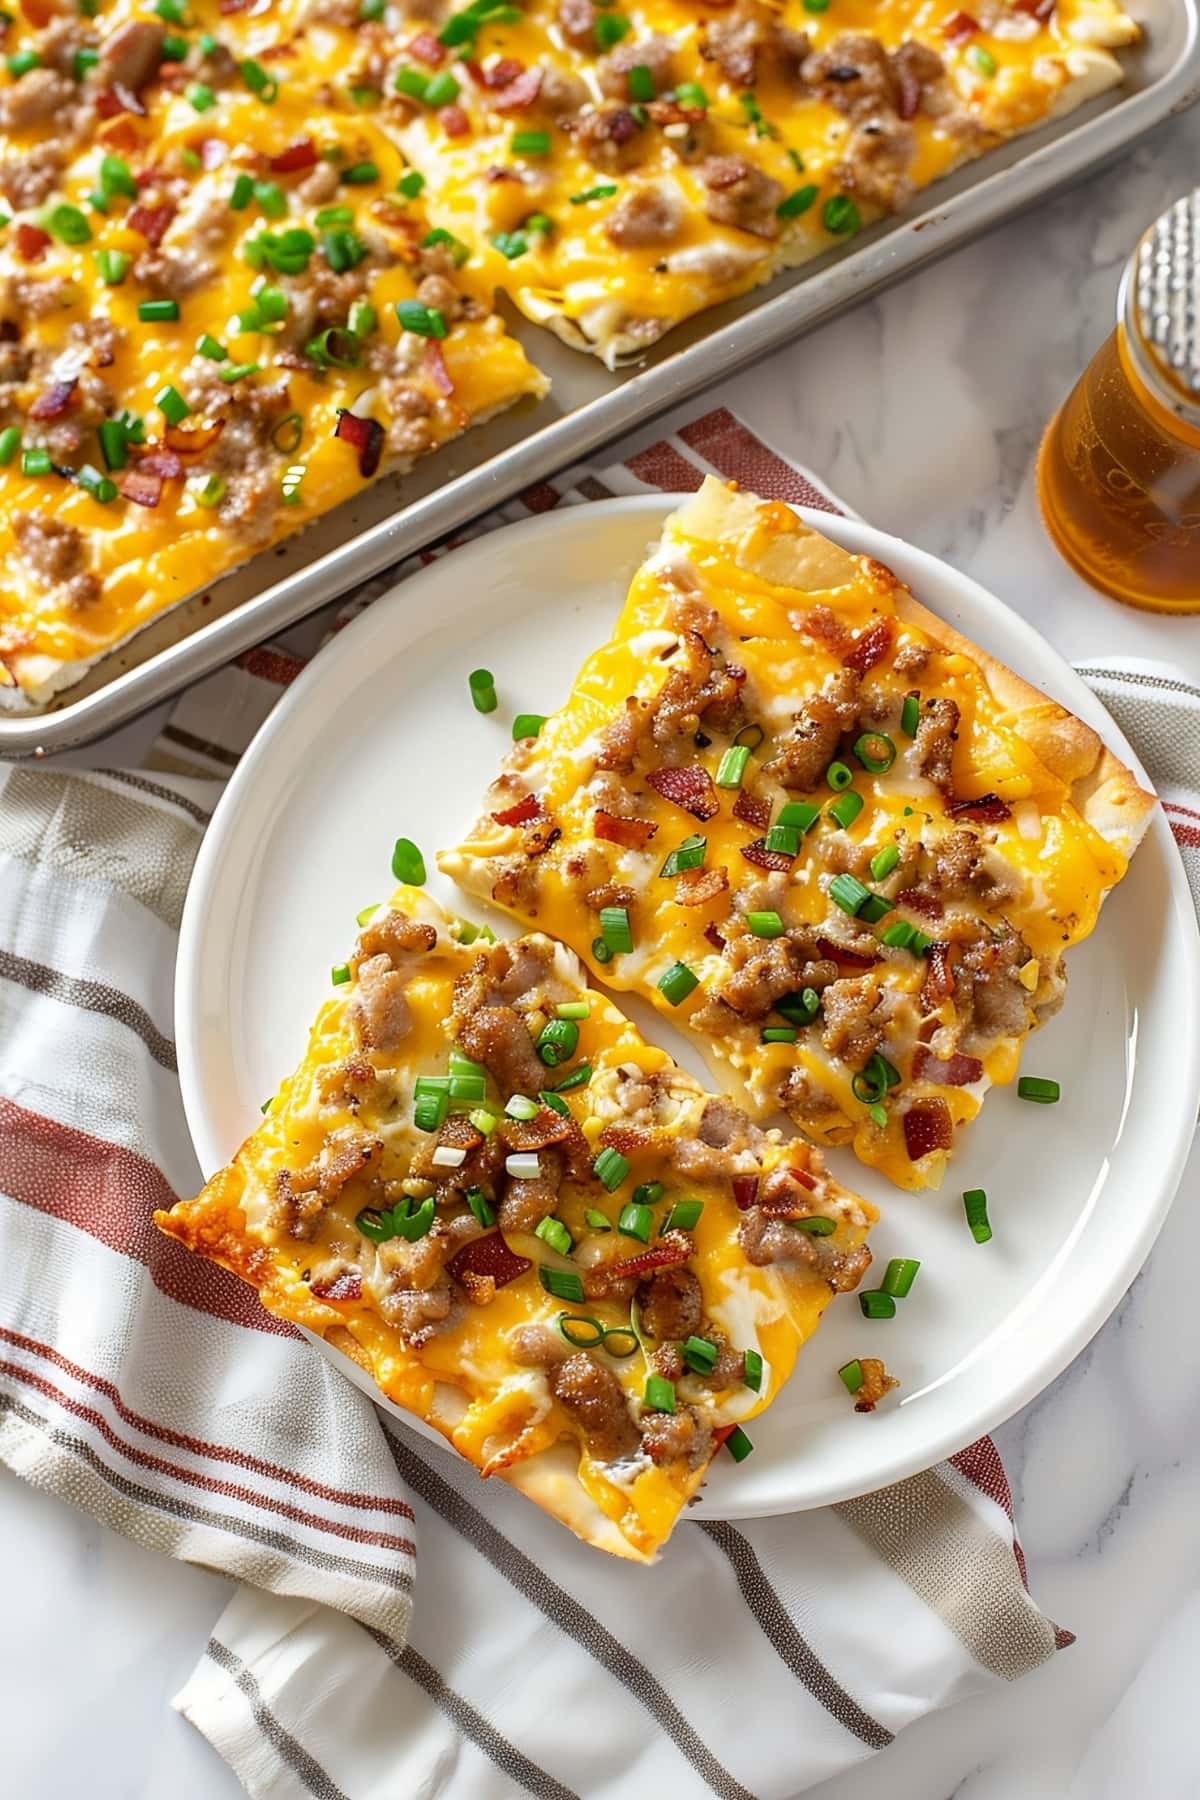 A tempting breakfast pizza loaded with chopped green onions, cheese, bacon and sausage